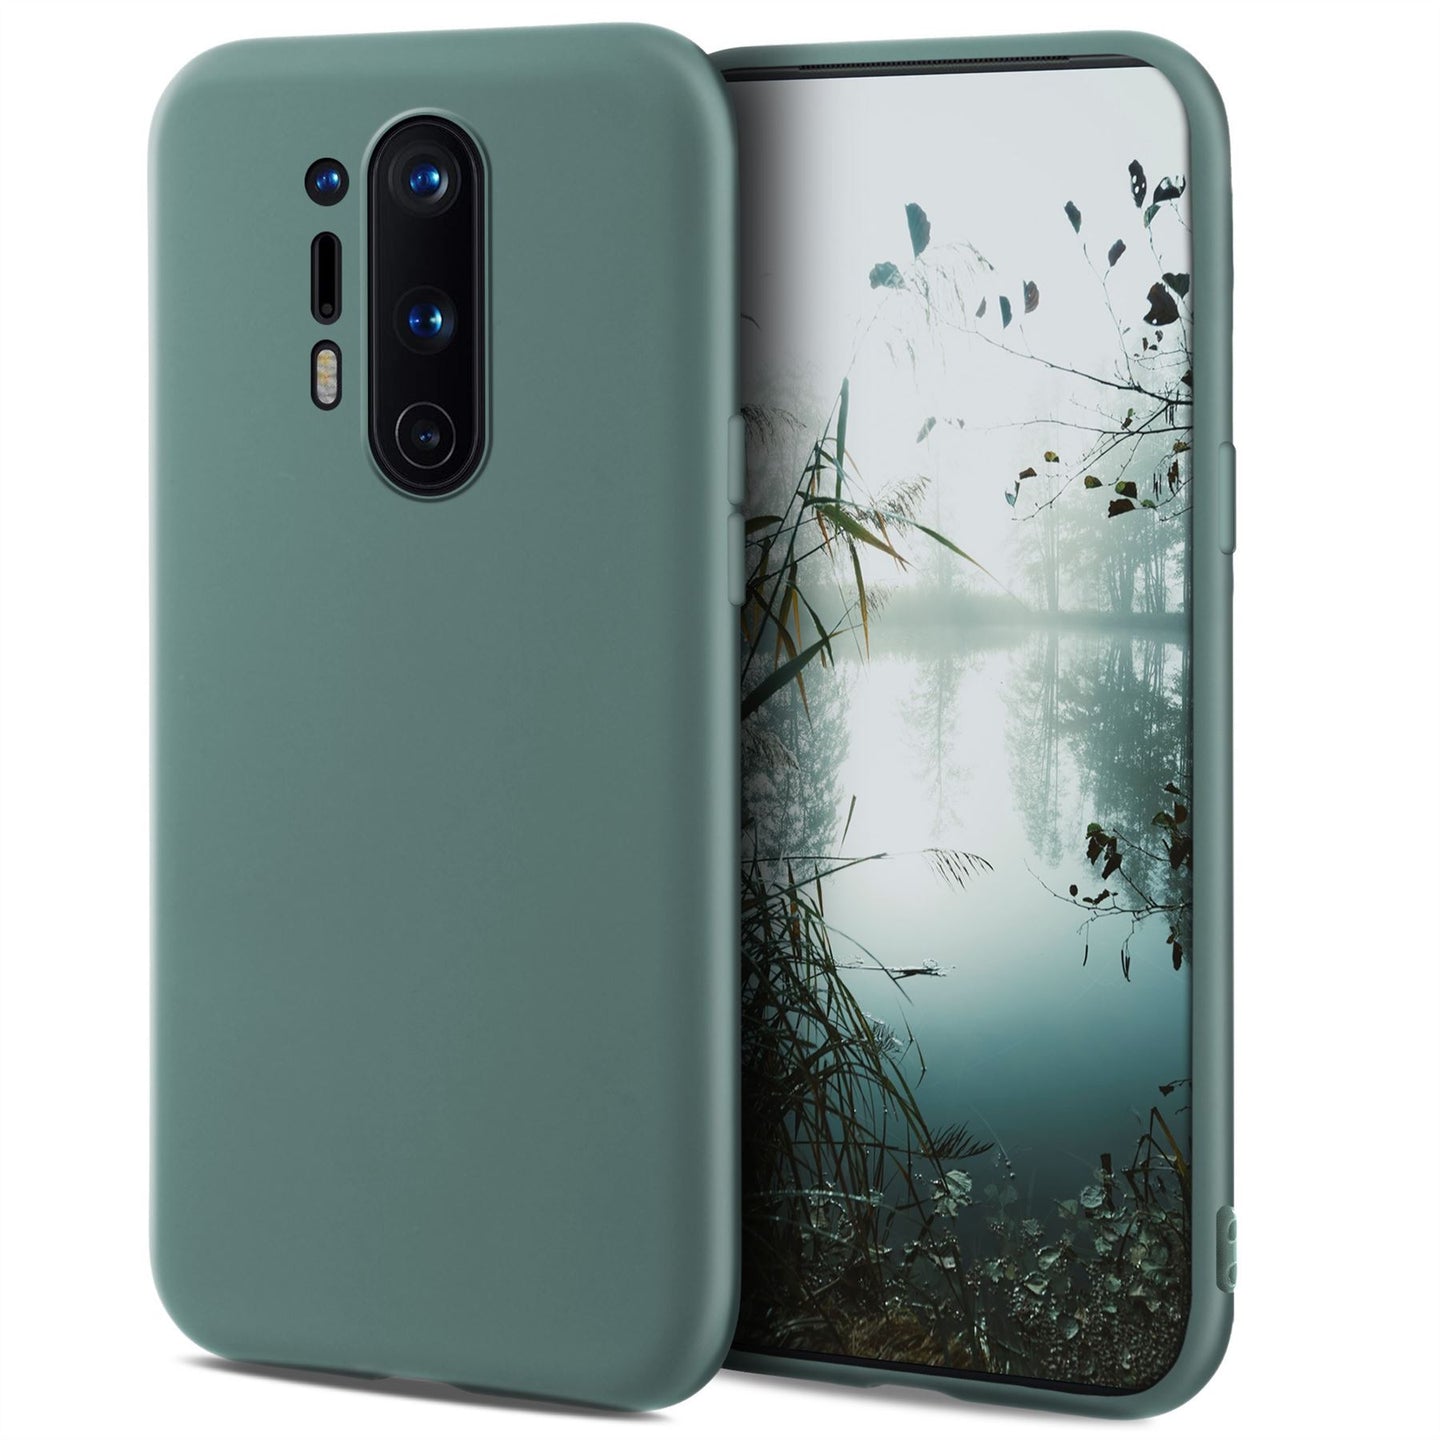 Moozy Minimalist Series Silicone Case for OnePlus 8 Pro, Blue Grey - Matte Finish Slim Soft TPU Cover